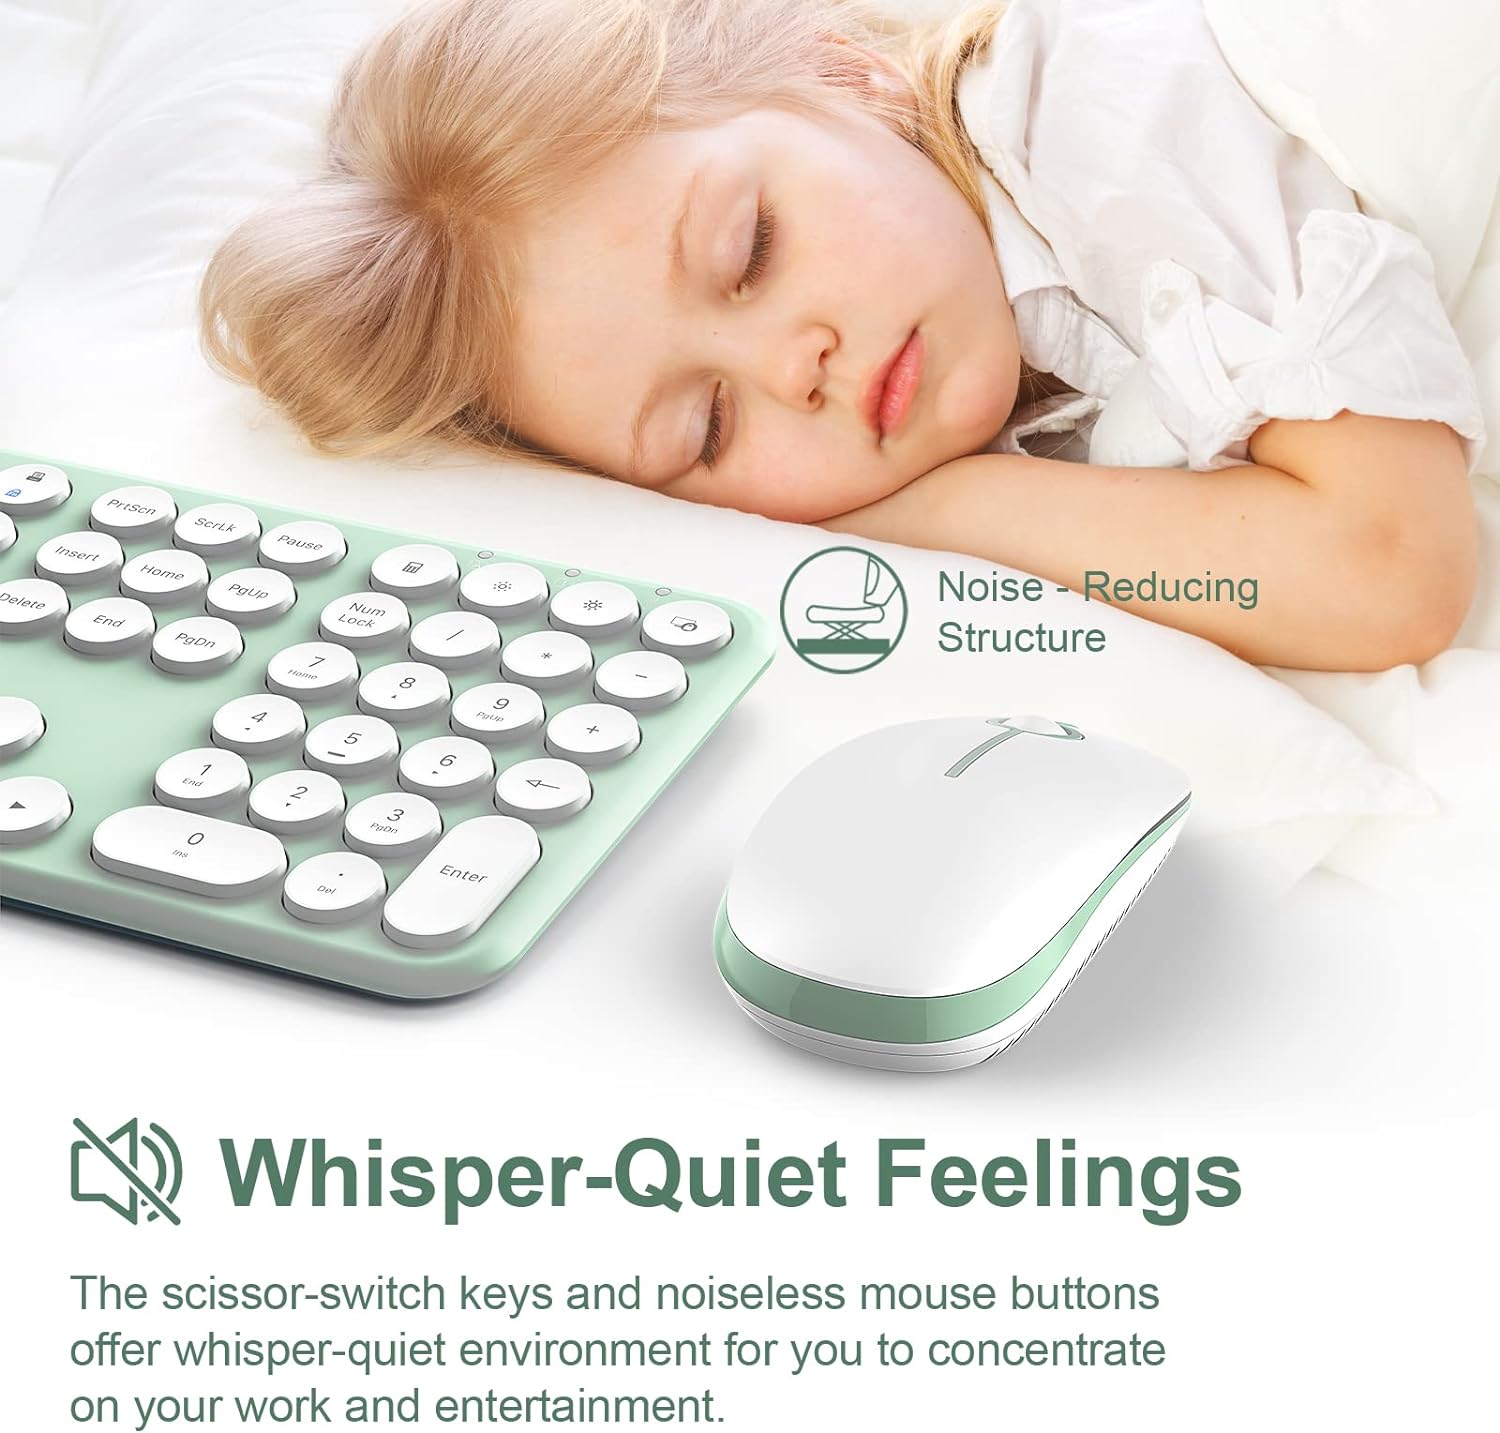 Mobifice Cute Keyboard and Mouse Wireless for PC - $40